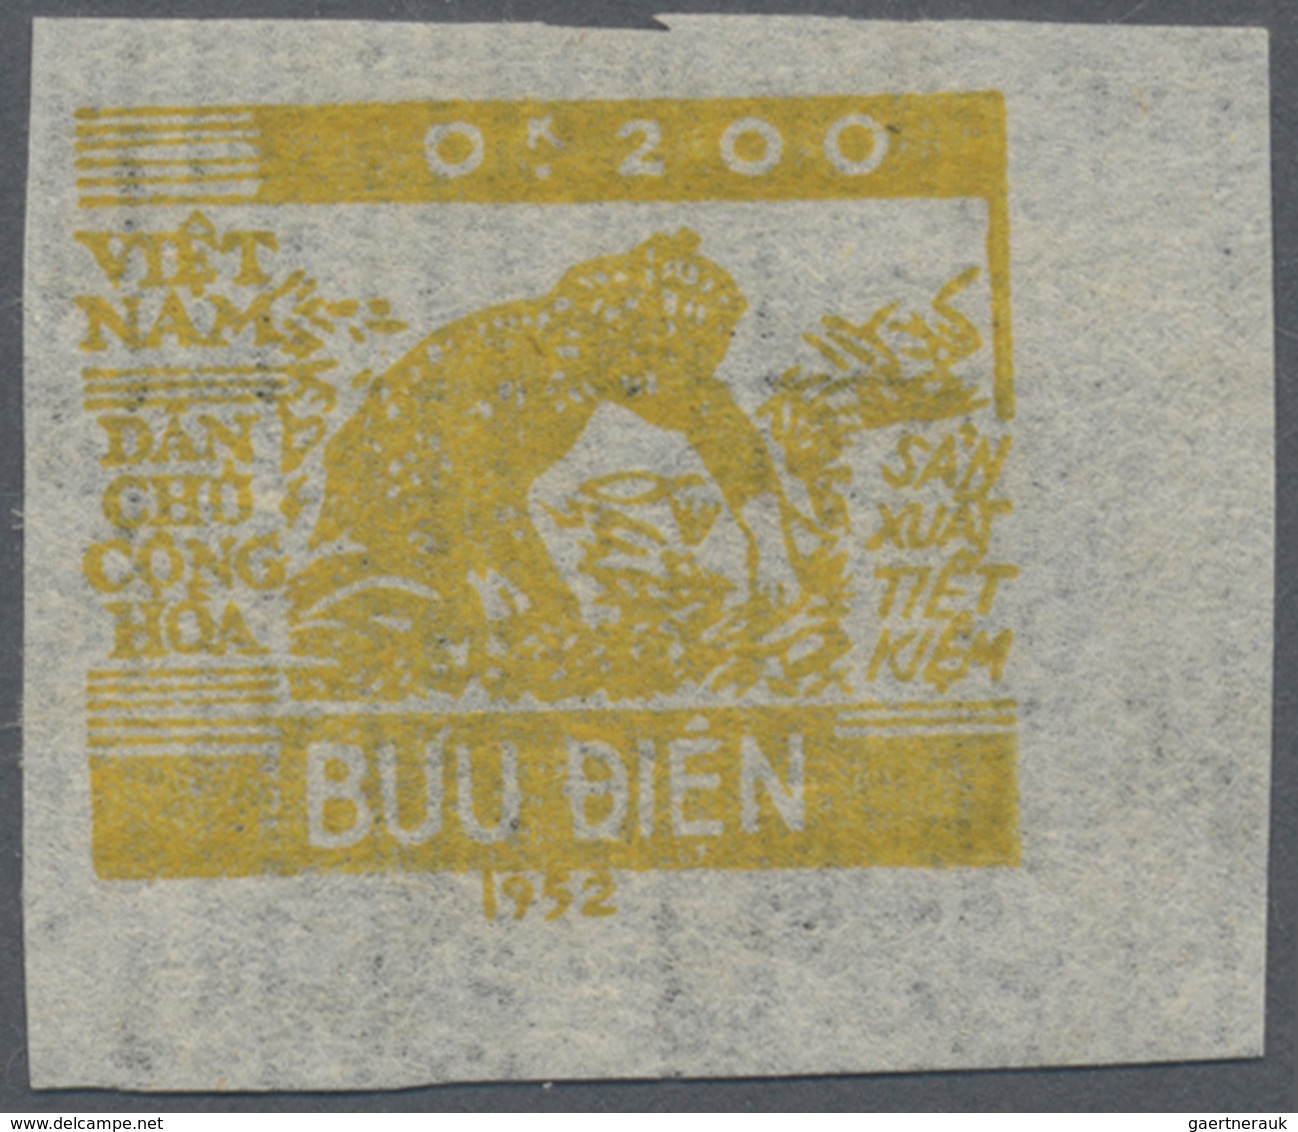 (*) Vietnam-Nord - Dienstmarken: 1953, NON ISSUED 0,200 (kilo Rice) Yellow On Light Tracing Ribbed Paper - Viêt-Nam